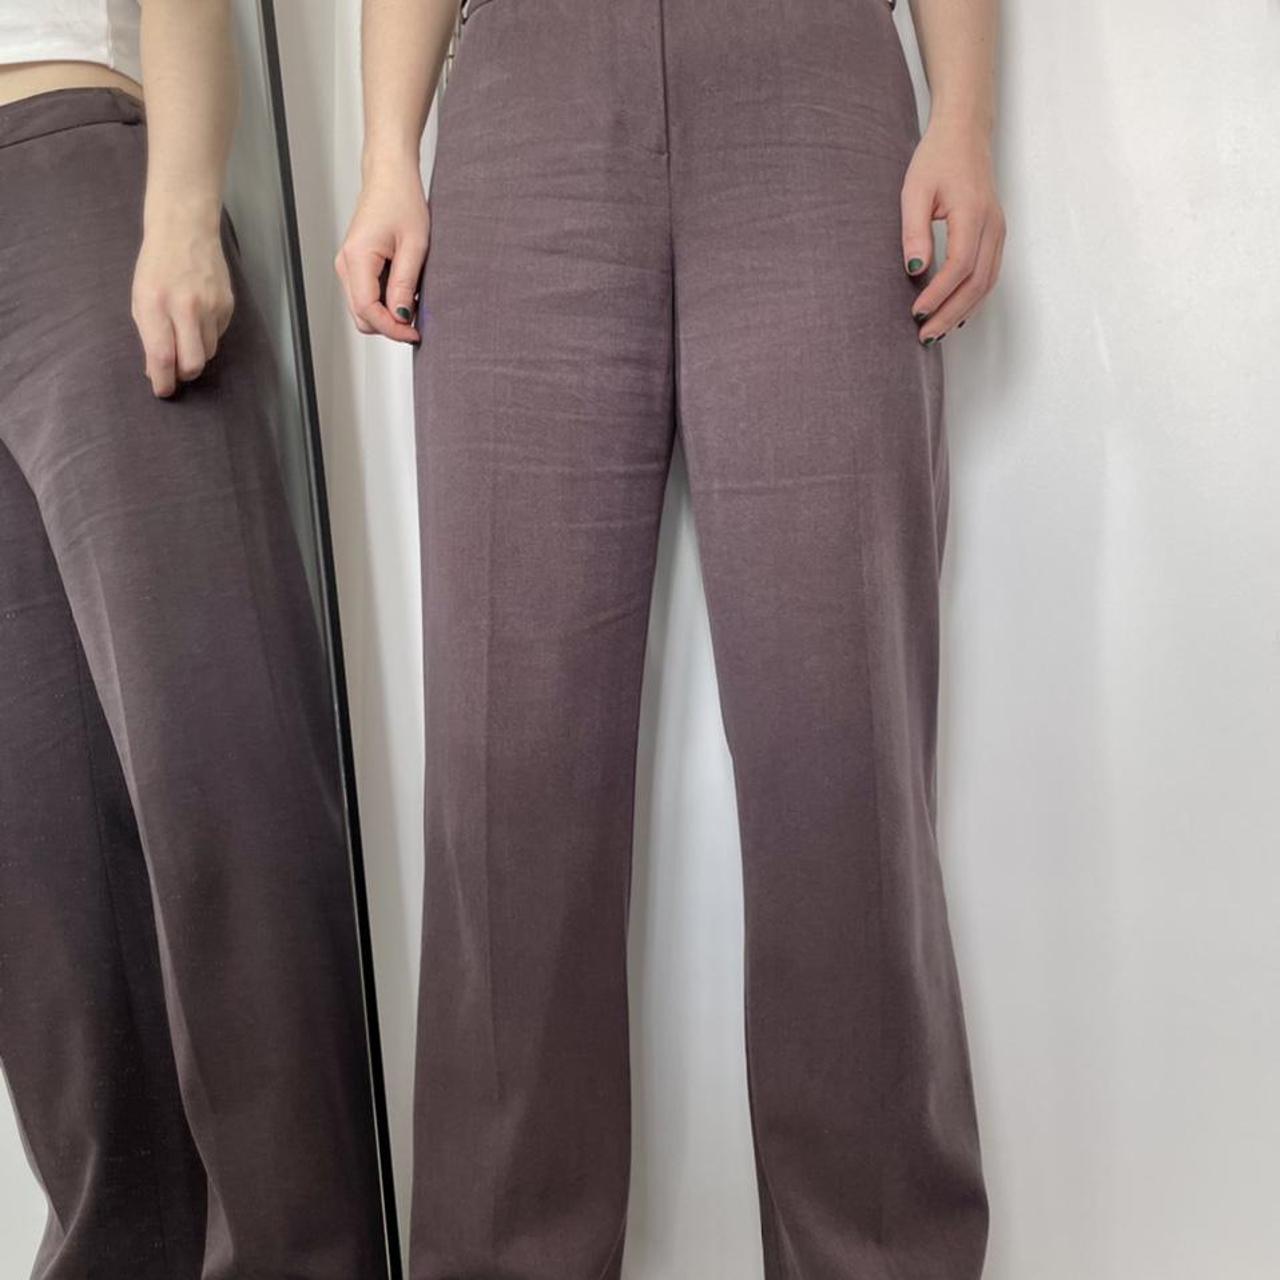 Product Image 4 - Petite flared trousers

In excellent vintage